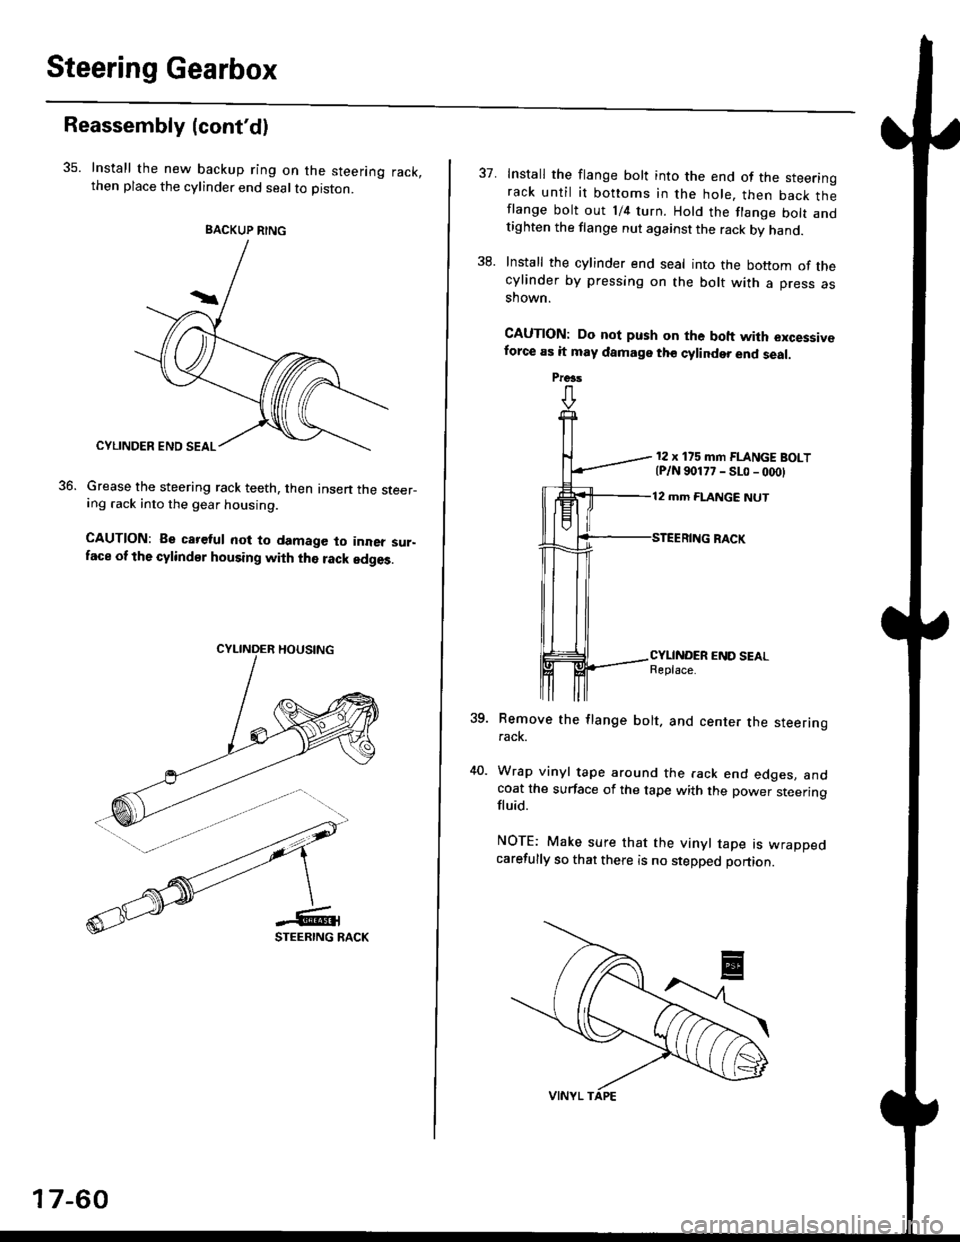 HONDA CIVIC 1996 6.G Service Manual Steering Gearbox
Reassembly {contd)
35. Install the new backup ring on the steering rack,then place the cylinder end seal to piston.
Grease the steering rack teeth, then Insen the steer-ing .ack into